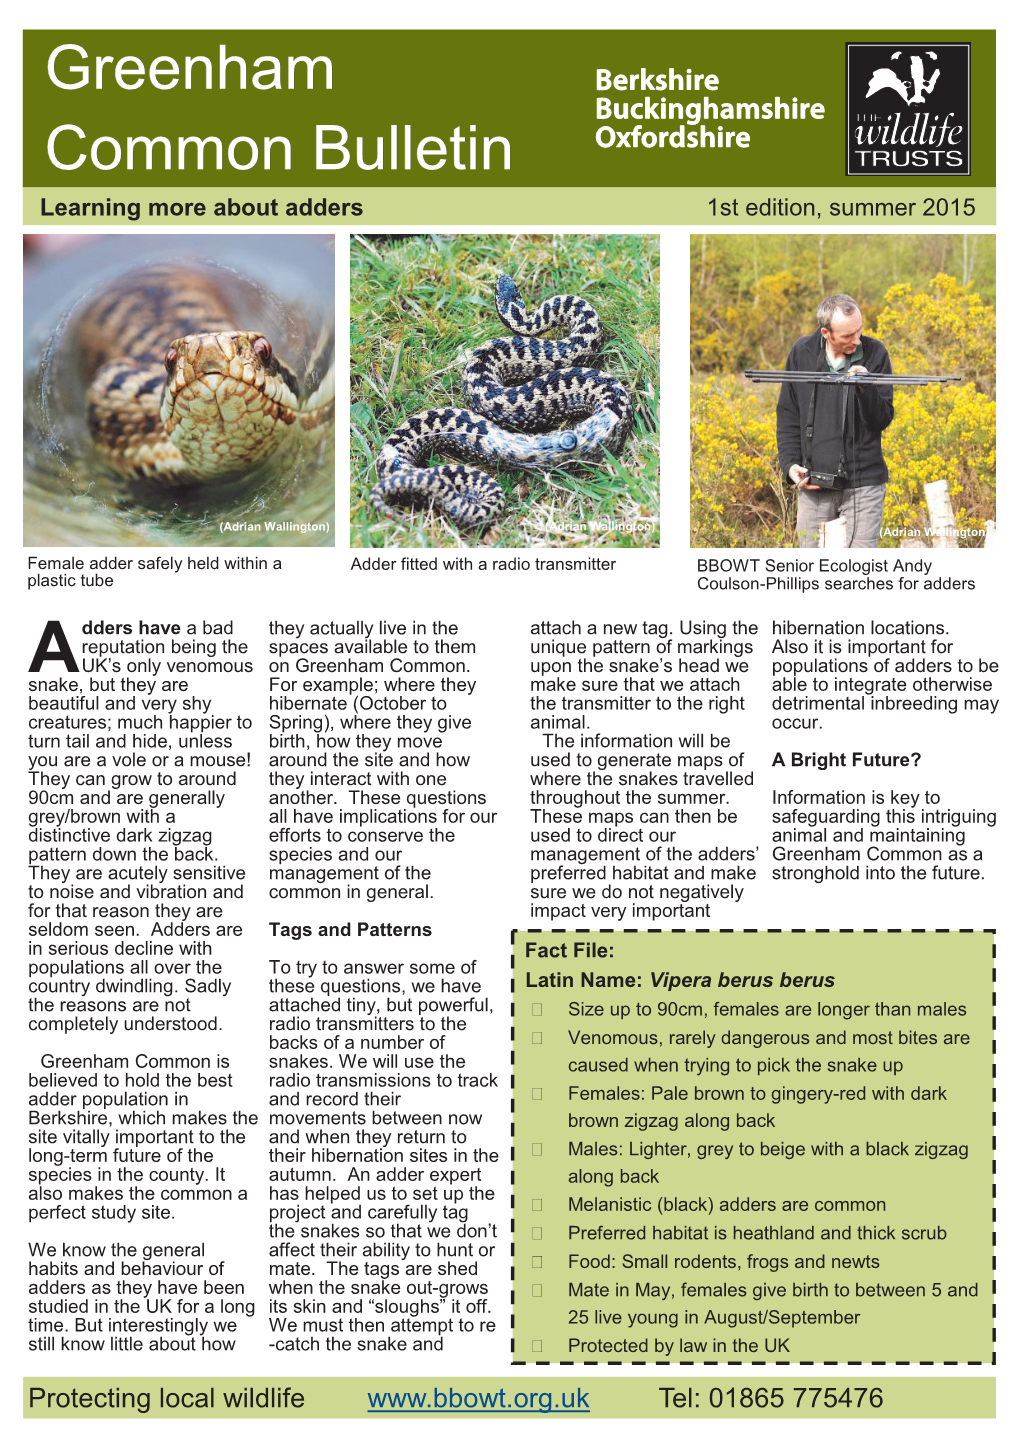 Greenham Common Bulletin Learning More About Adders 1St Edition, Summer 2015